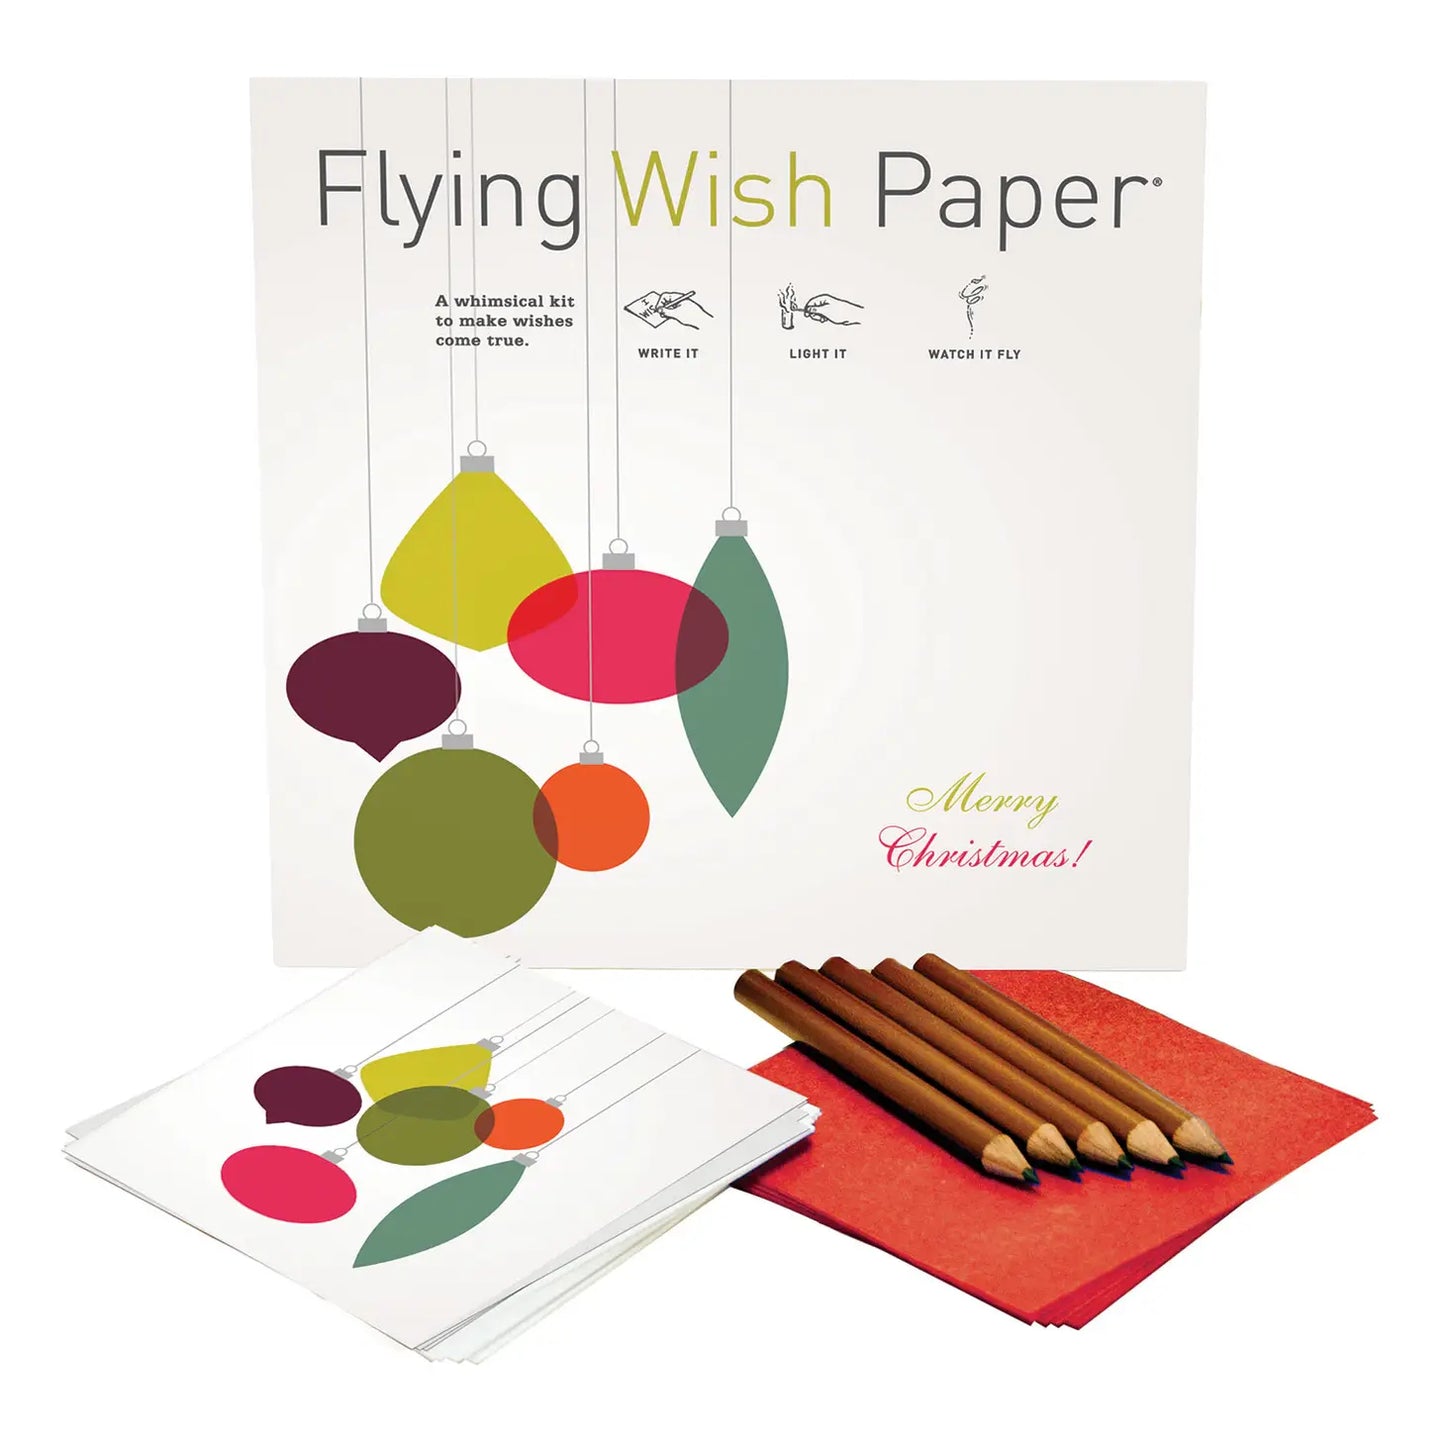 FLYING WISH PAPER 'Retro Ornament' / Large Kit with 50 Wishes + accessories